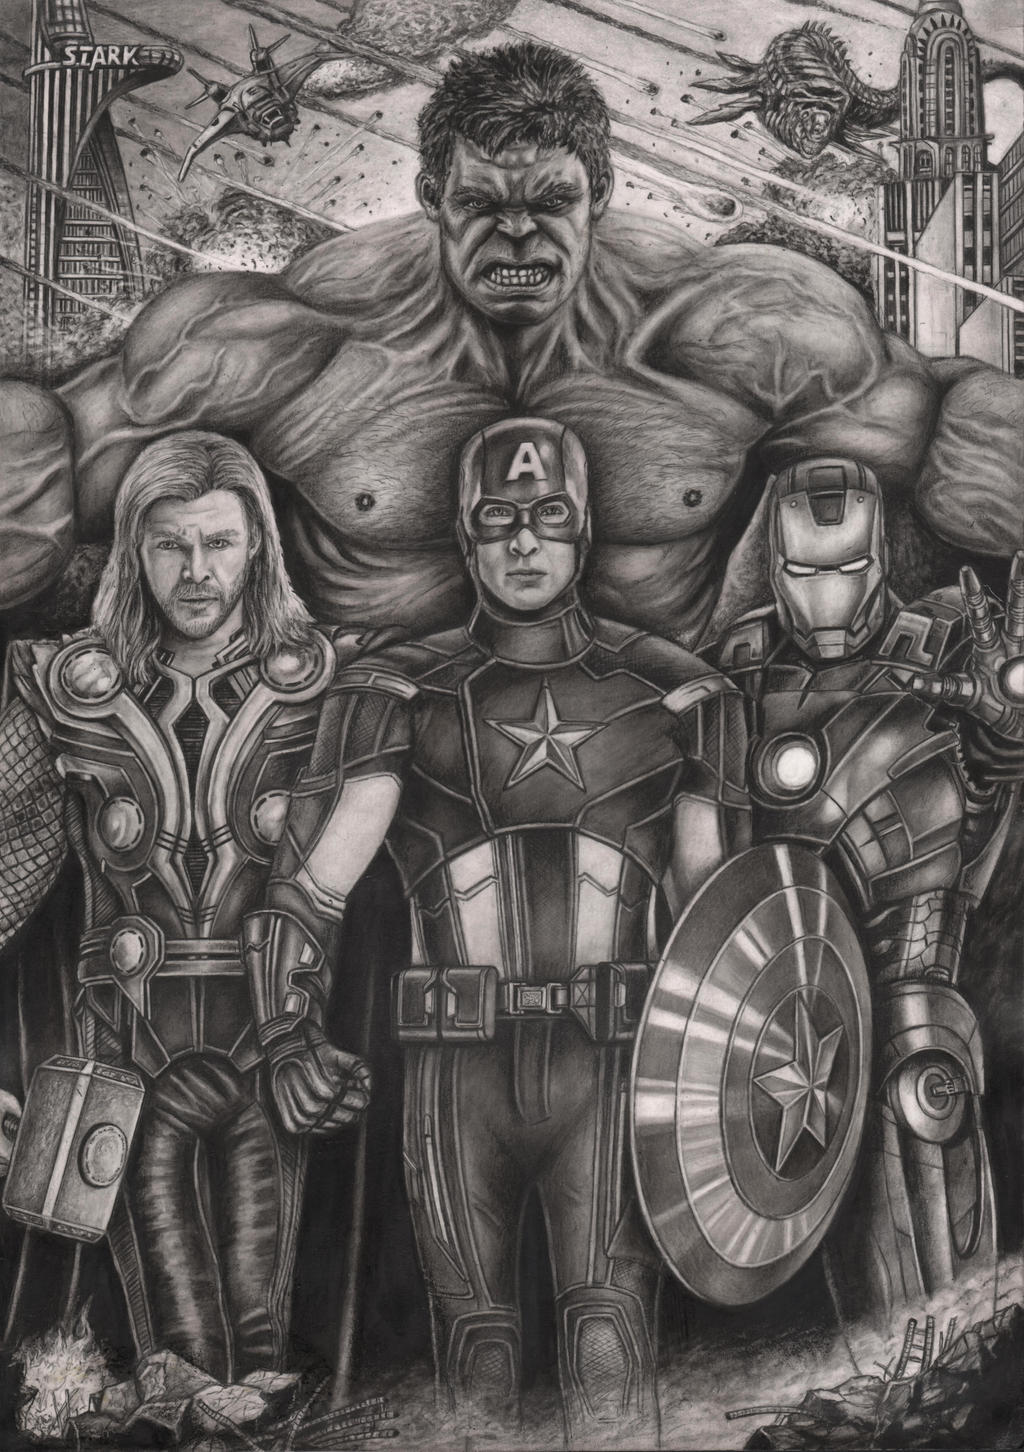 'The Avengers' graphite drawing by PenTacularArtist on DeviantArt